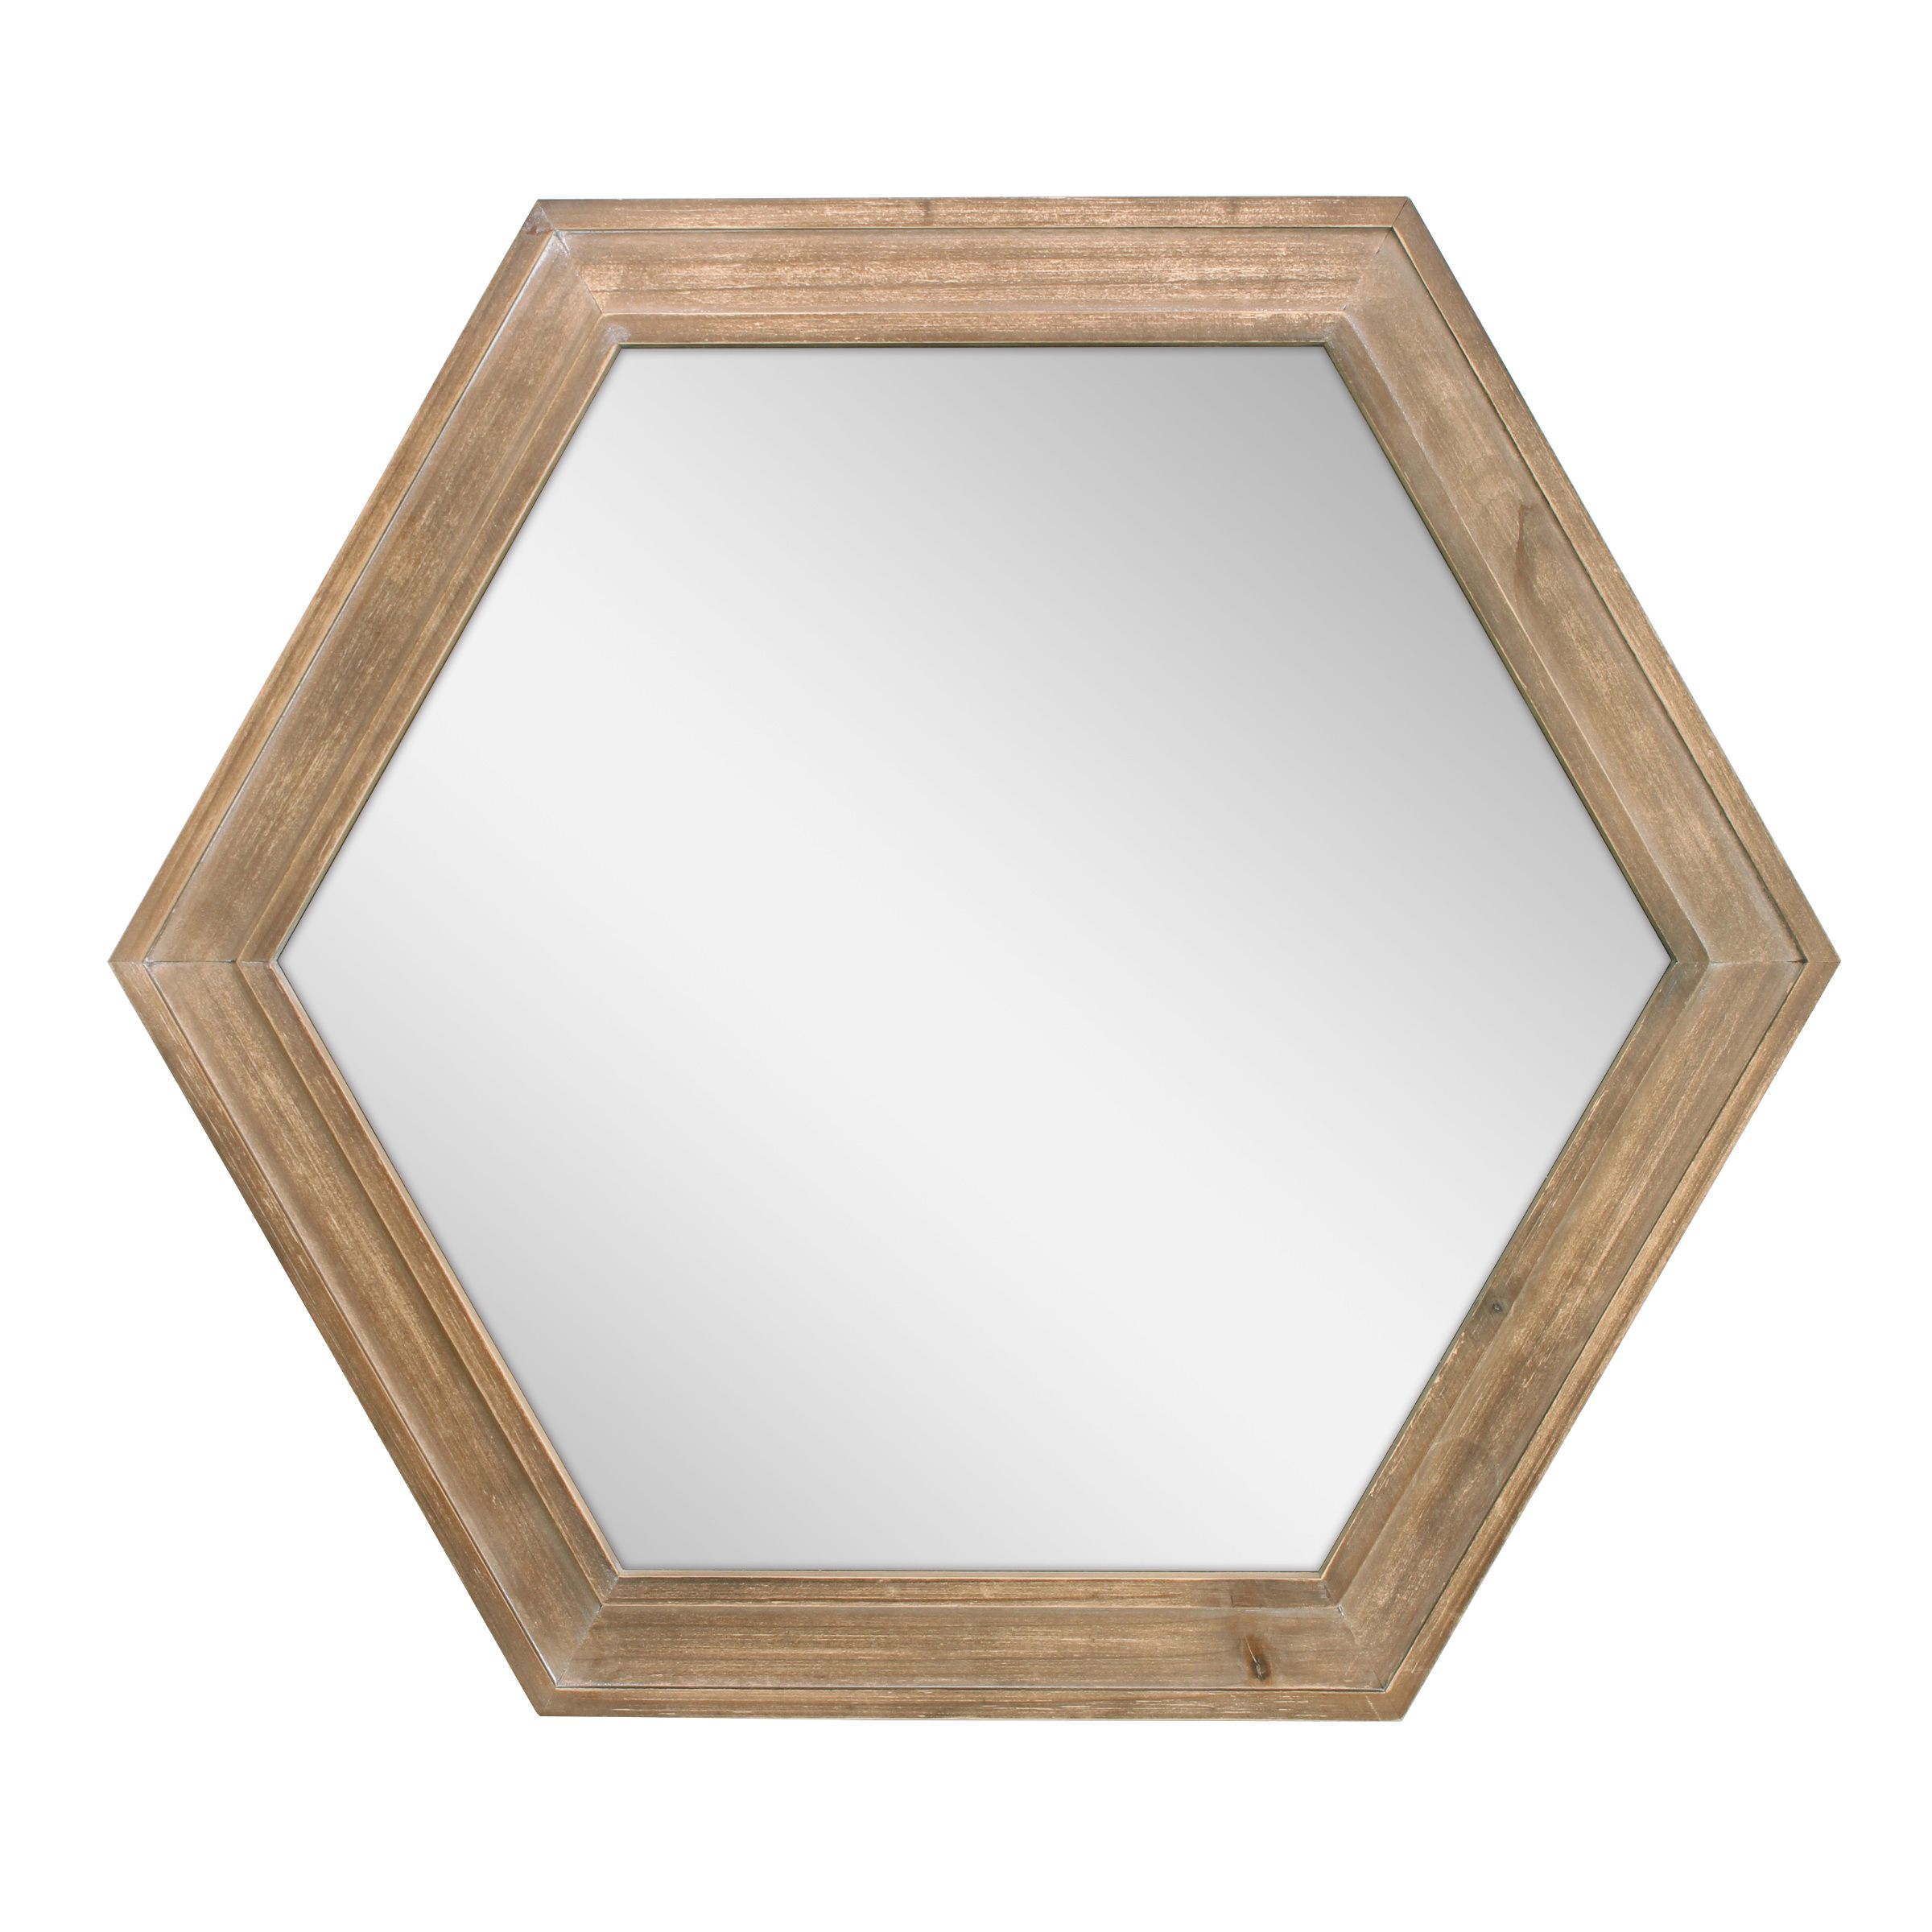 Stonebriar Decorative 24" Hexagon Hanging Wall Mirror With Pertaining To Famous Hexagons Wood Wall Art (View 8 of 20)